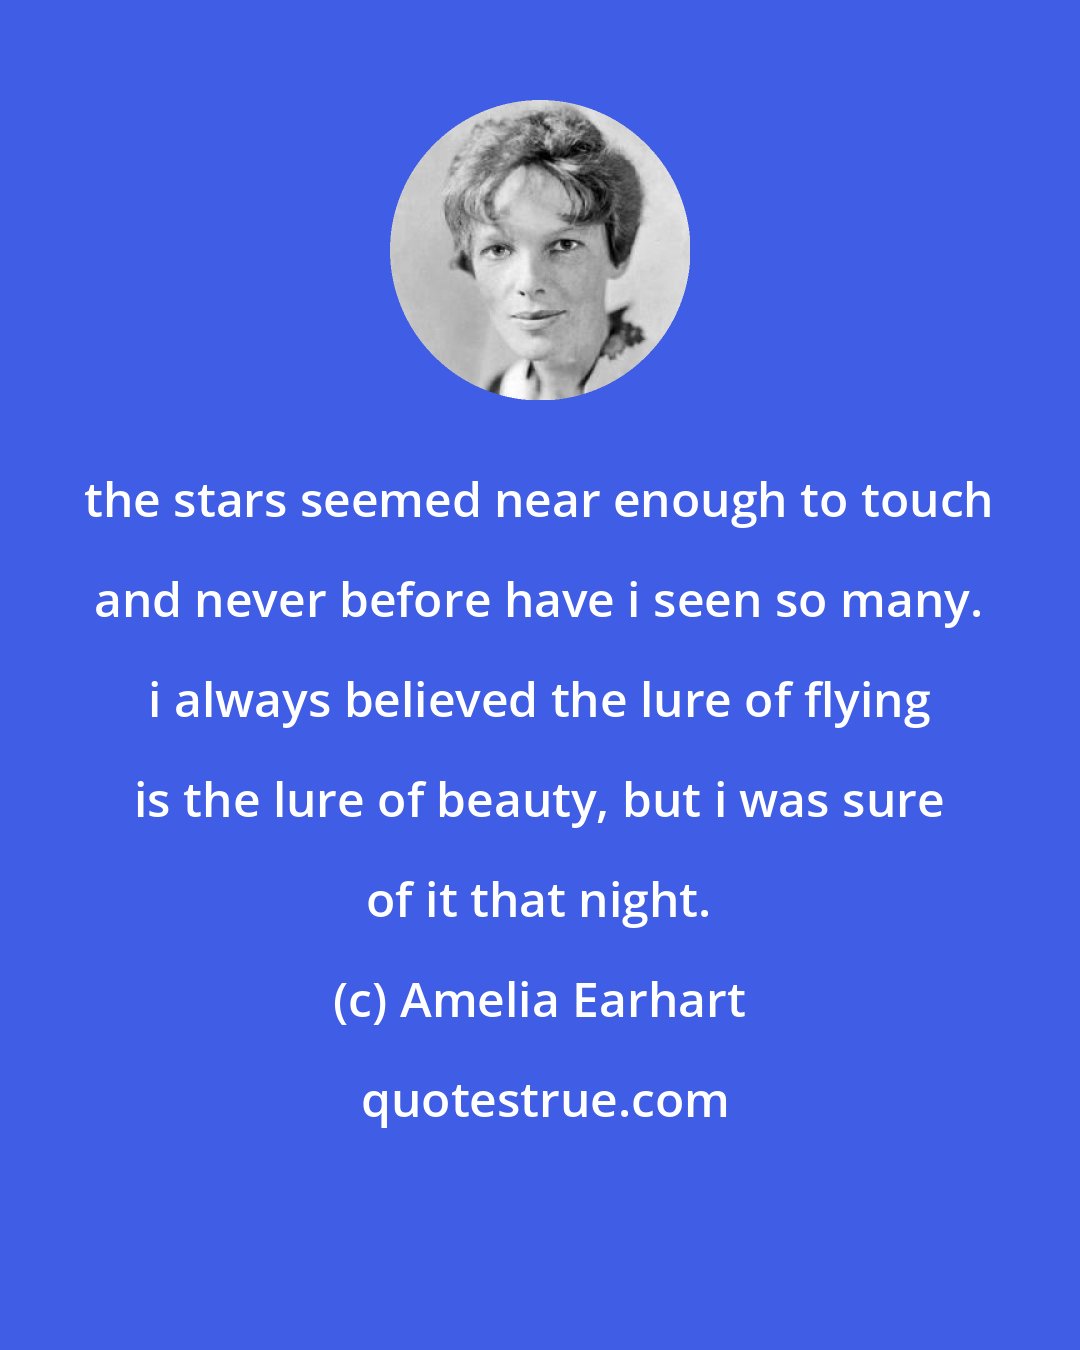 Amelia Earhart: the stars seemed near enough to touch and never before have i seen so many. i always believed the lure of flying is the lure of beauty, but i was sure of it that night.